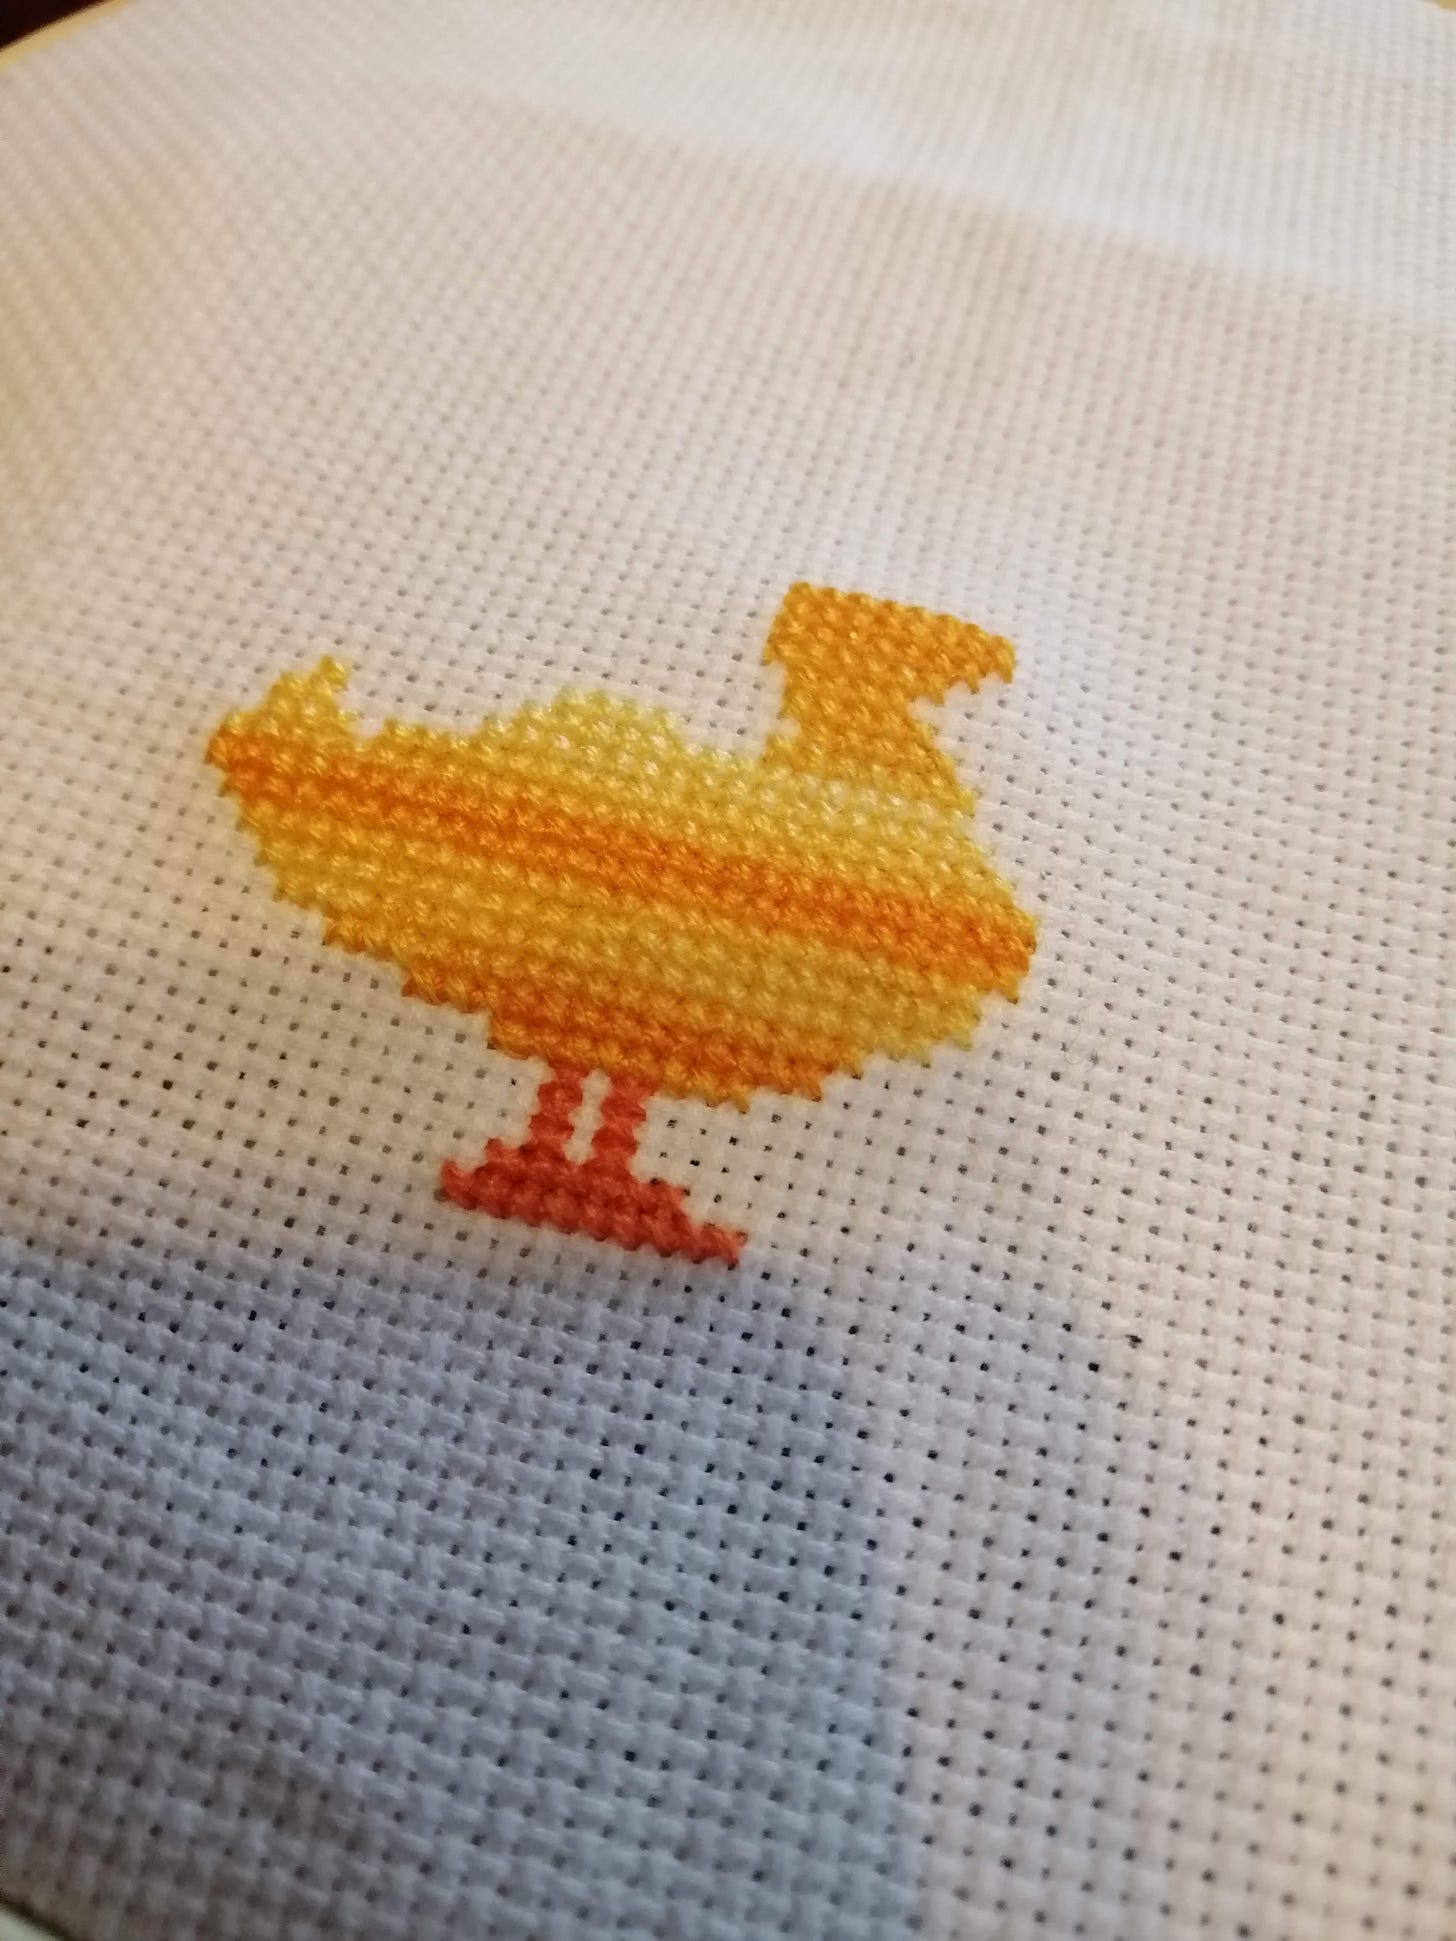 cross stitch in progress of the bottom part of a duck missing the top of its head. There is no text yet